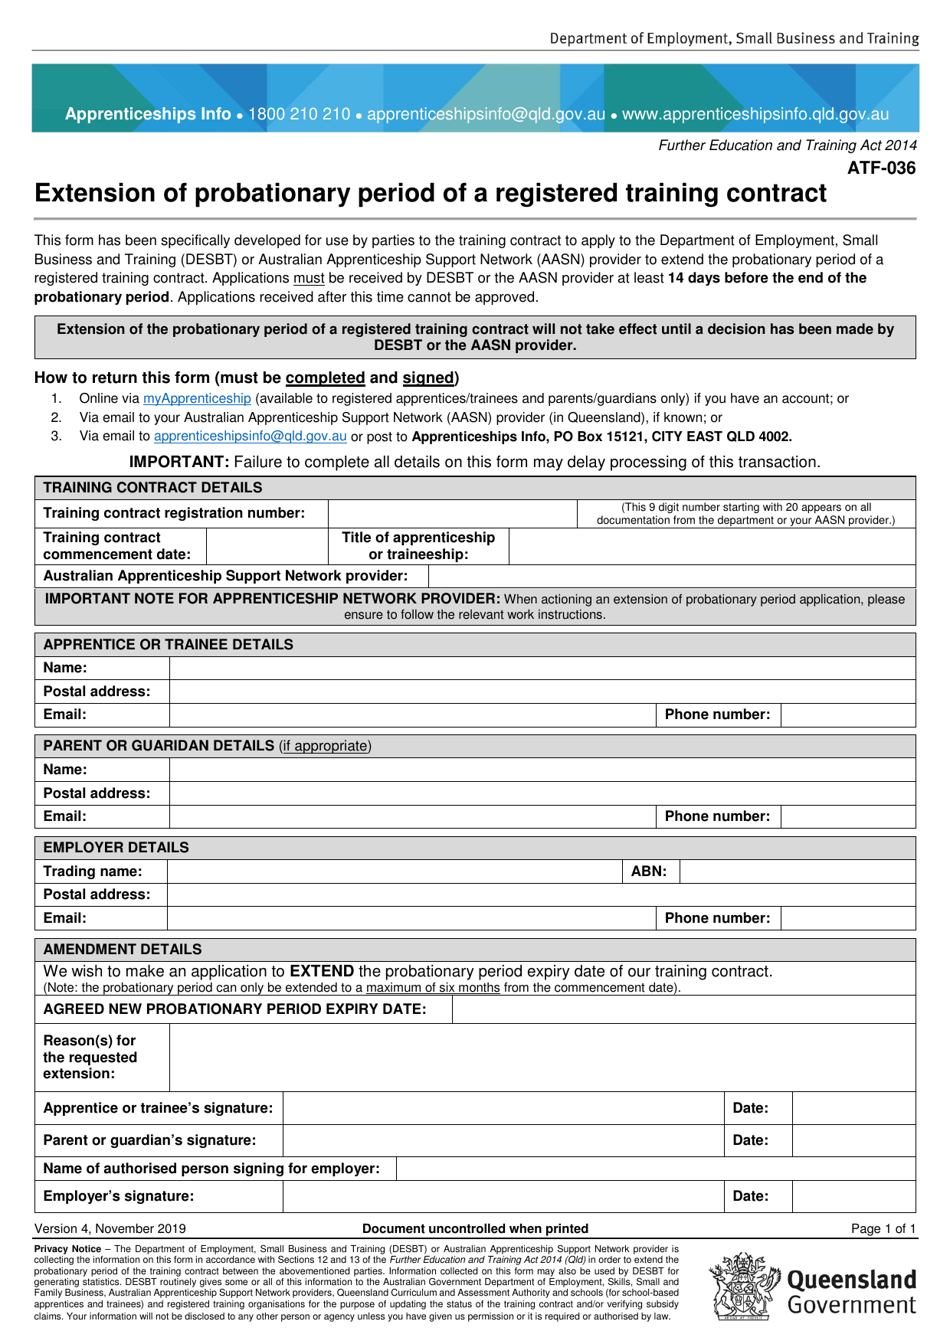 Form ATF-036 Extension of Probationary Period of a Registered Training Contract - Queensland, Australia, Page 1